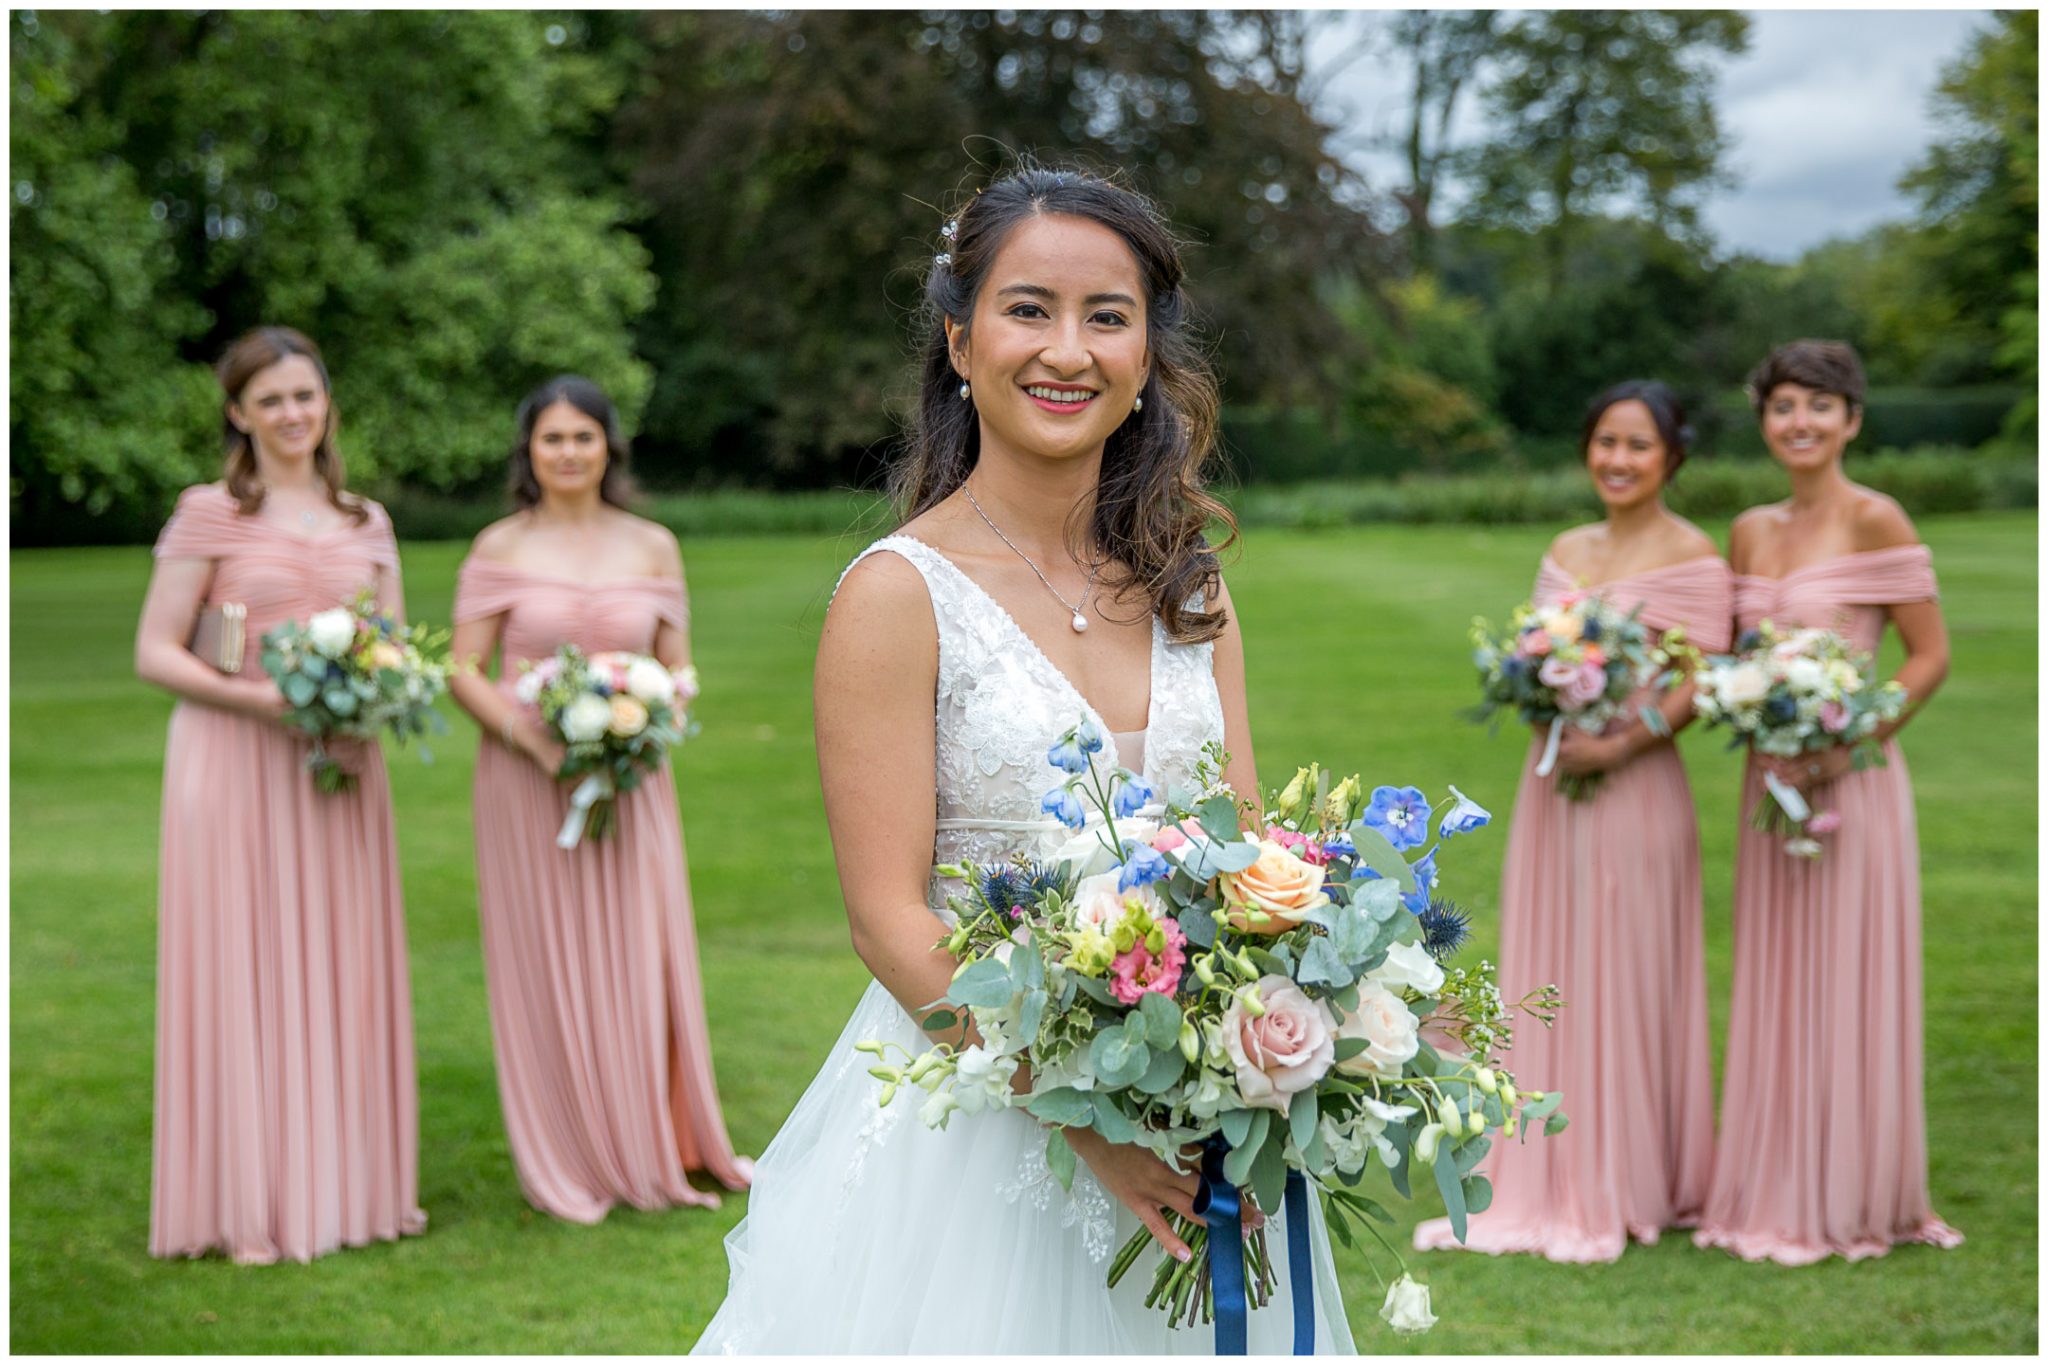 Bride portrait with bridesmaids in the background